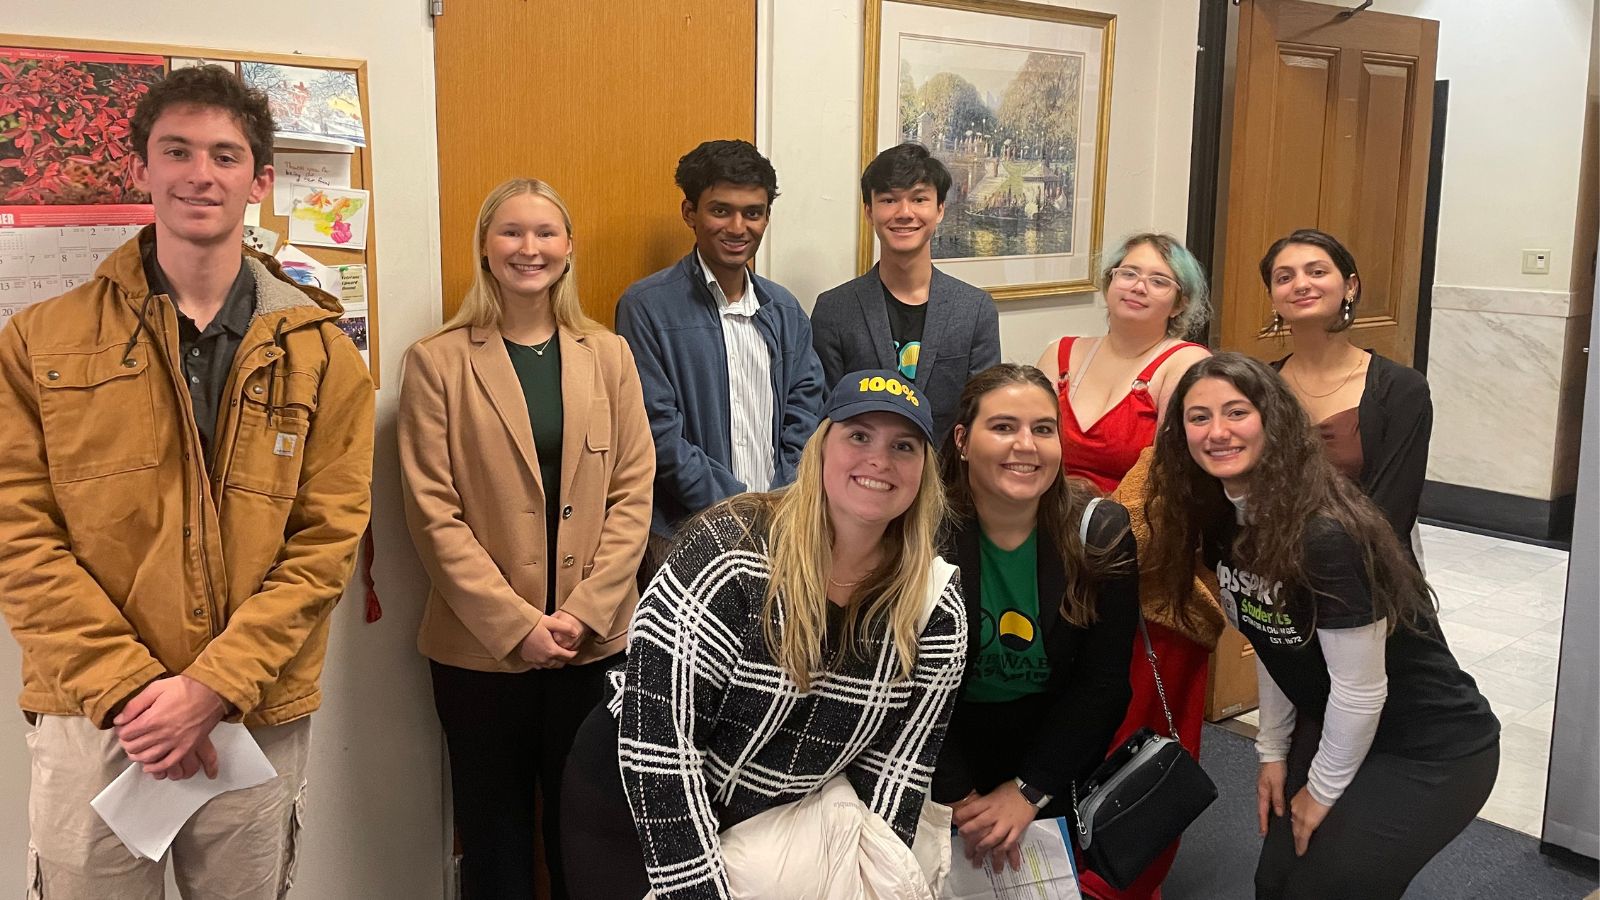 8 students meet with a legislator's staff person at the Massachusetts State House.